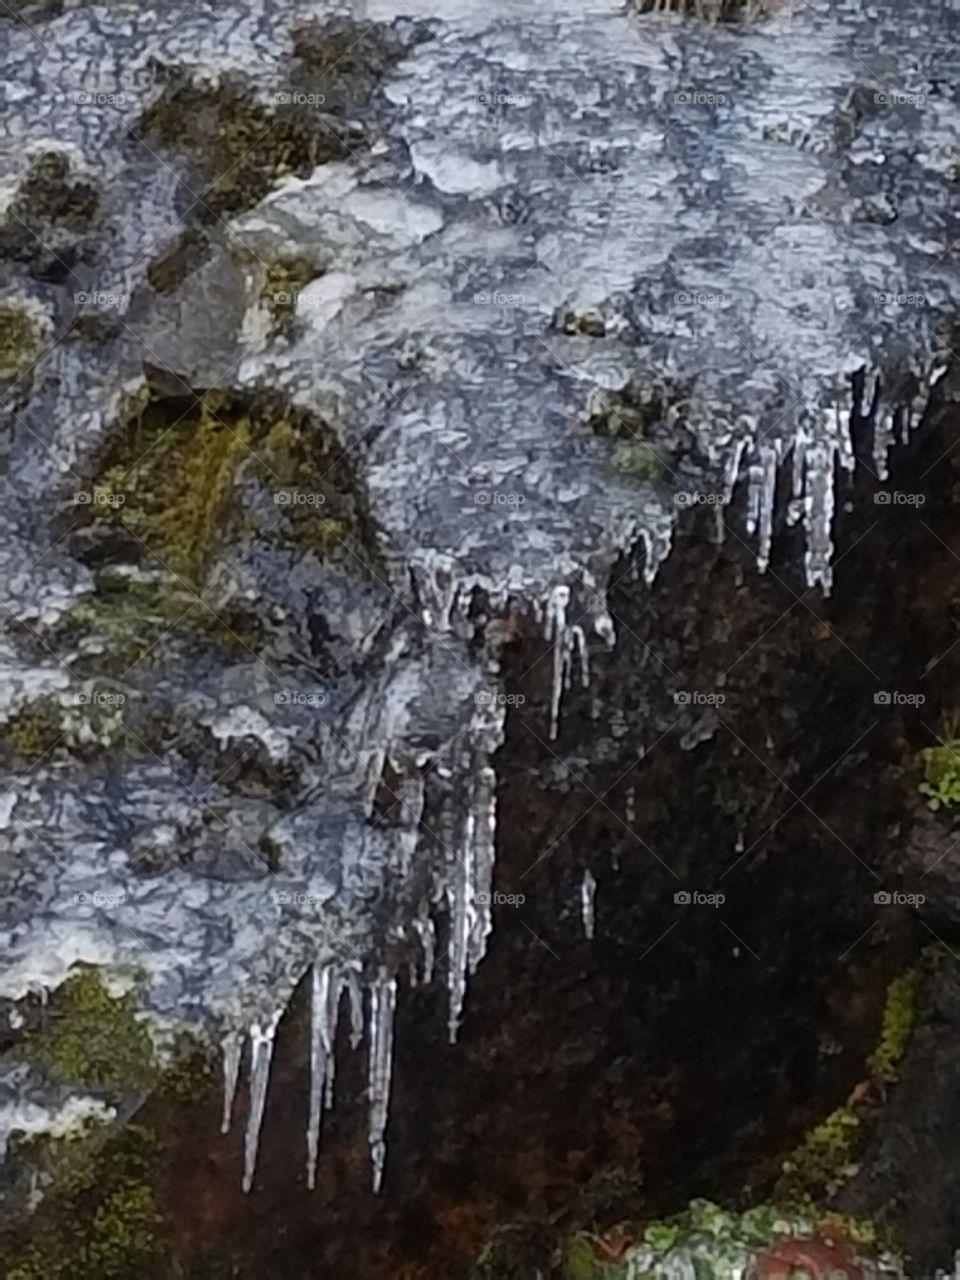 Ice cicles on the rocks